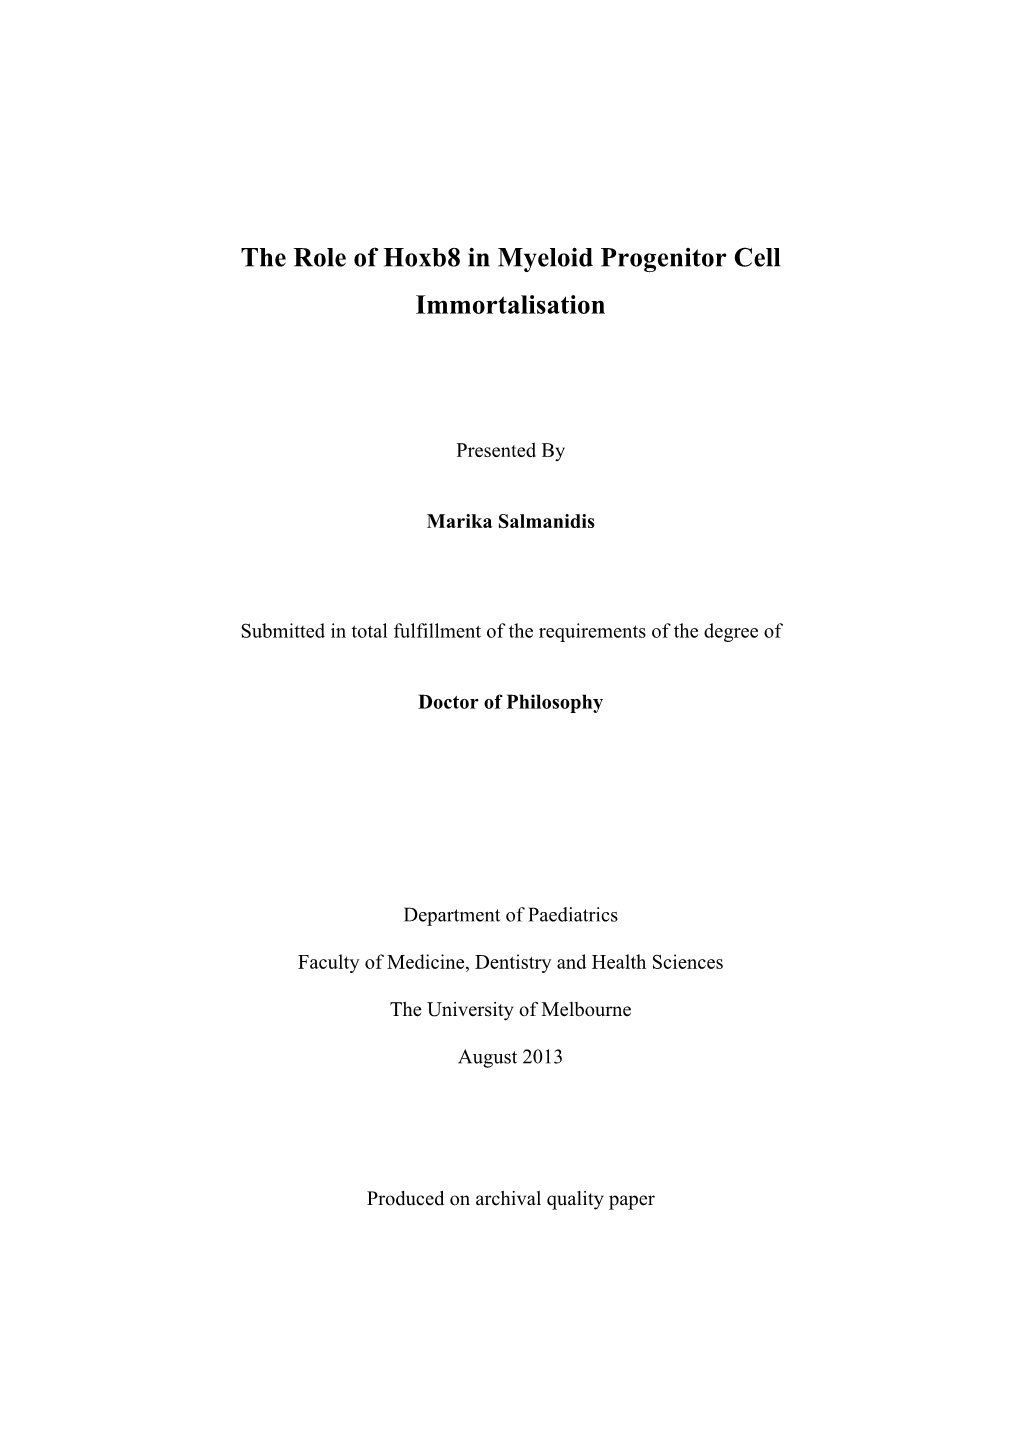 The Role of Hoxb8 in Myeloid Progenitor Cell Immortalisation